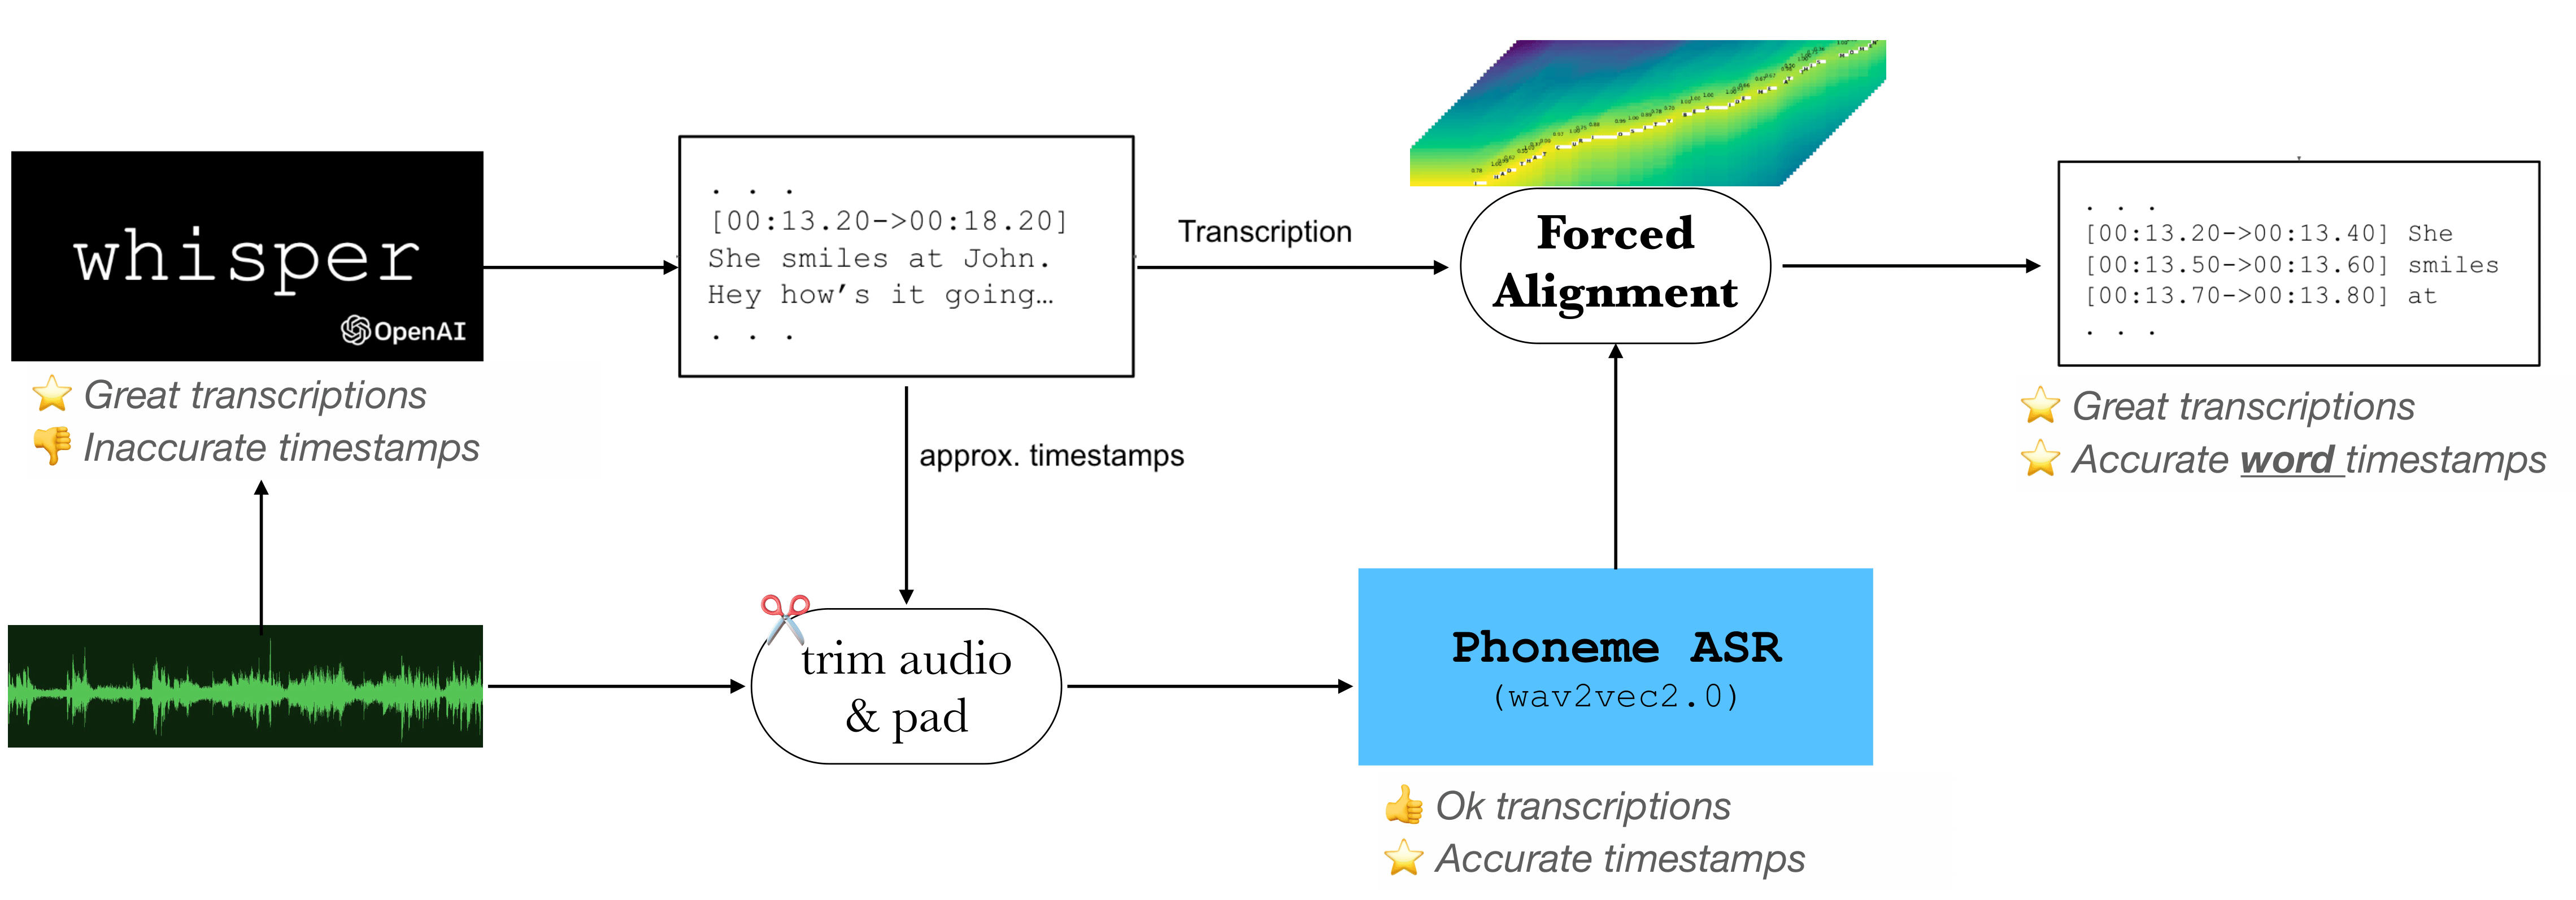 WhisperX: Free audio transcription with speaker recognition